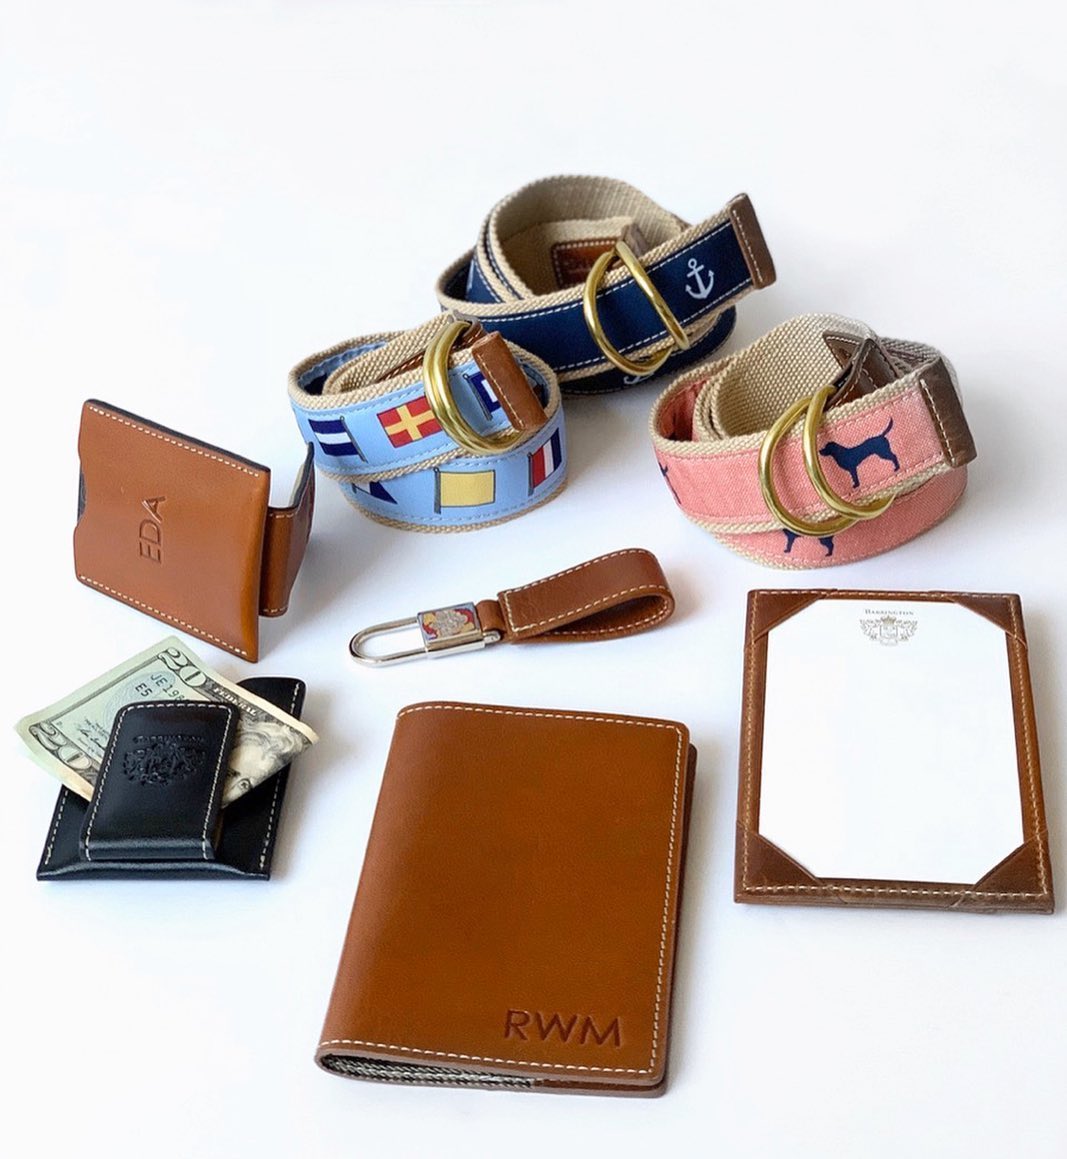 An assortment of leather money clips next to stylish woven belts on a wooden surface.